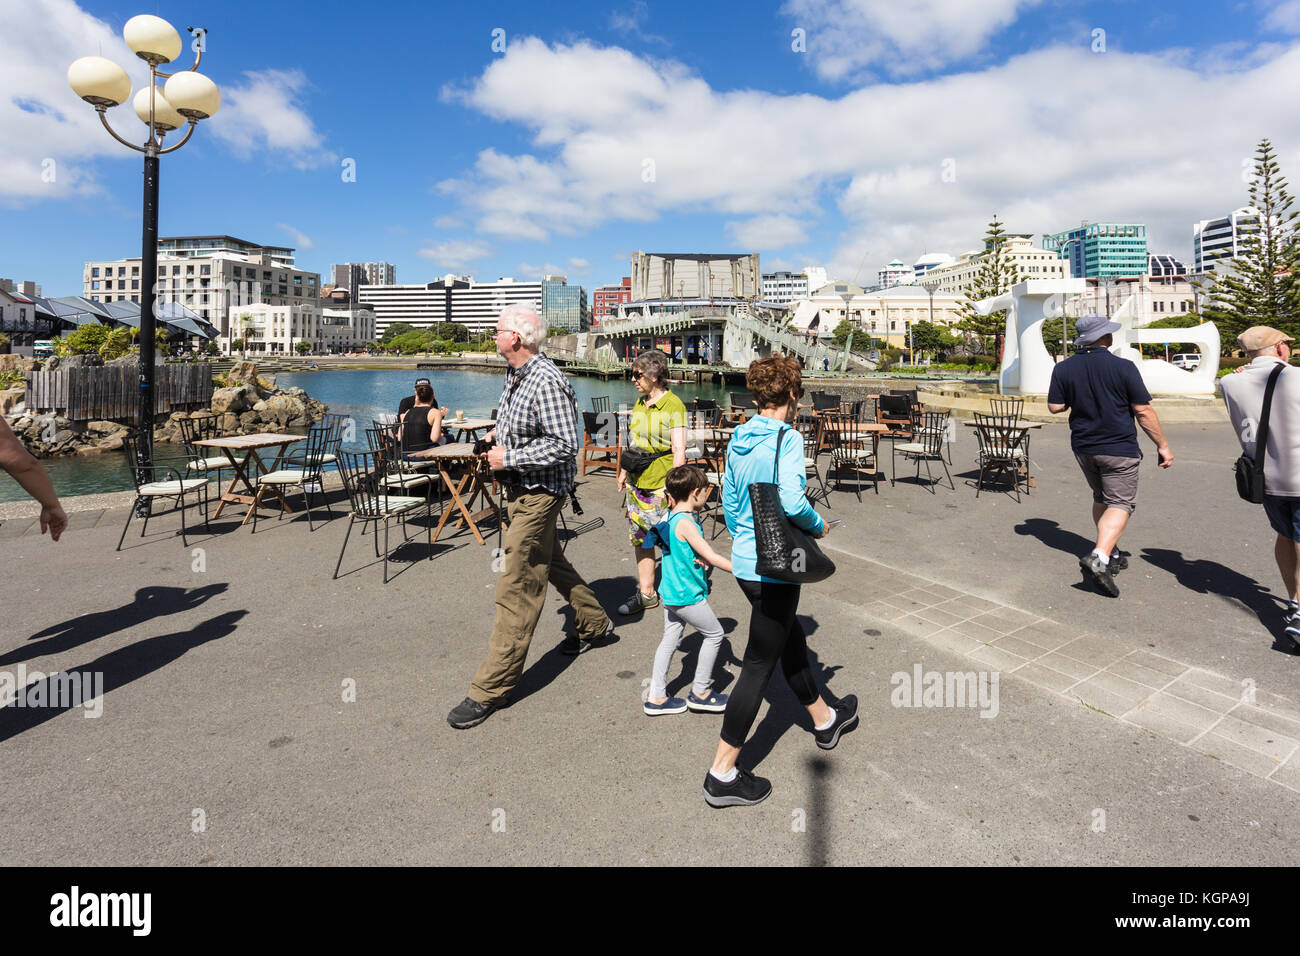 WELLINGTON, NEW ZEALAND - MARCH 1, 2017: People walk along the seafront promenade in Wellingtion on a sunny summer day in New Zealand capital city. Stock Photo